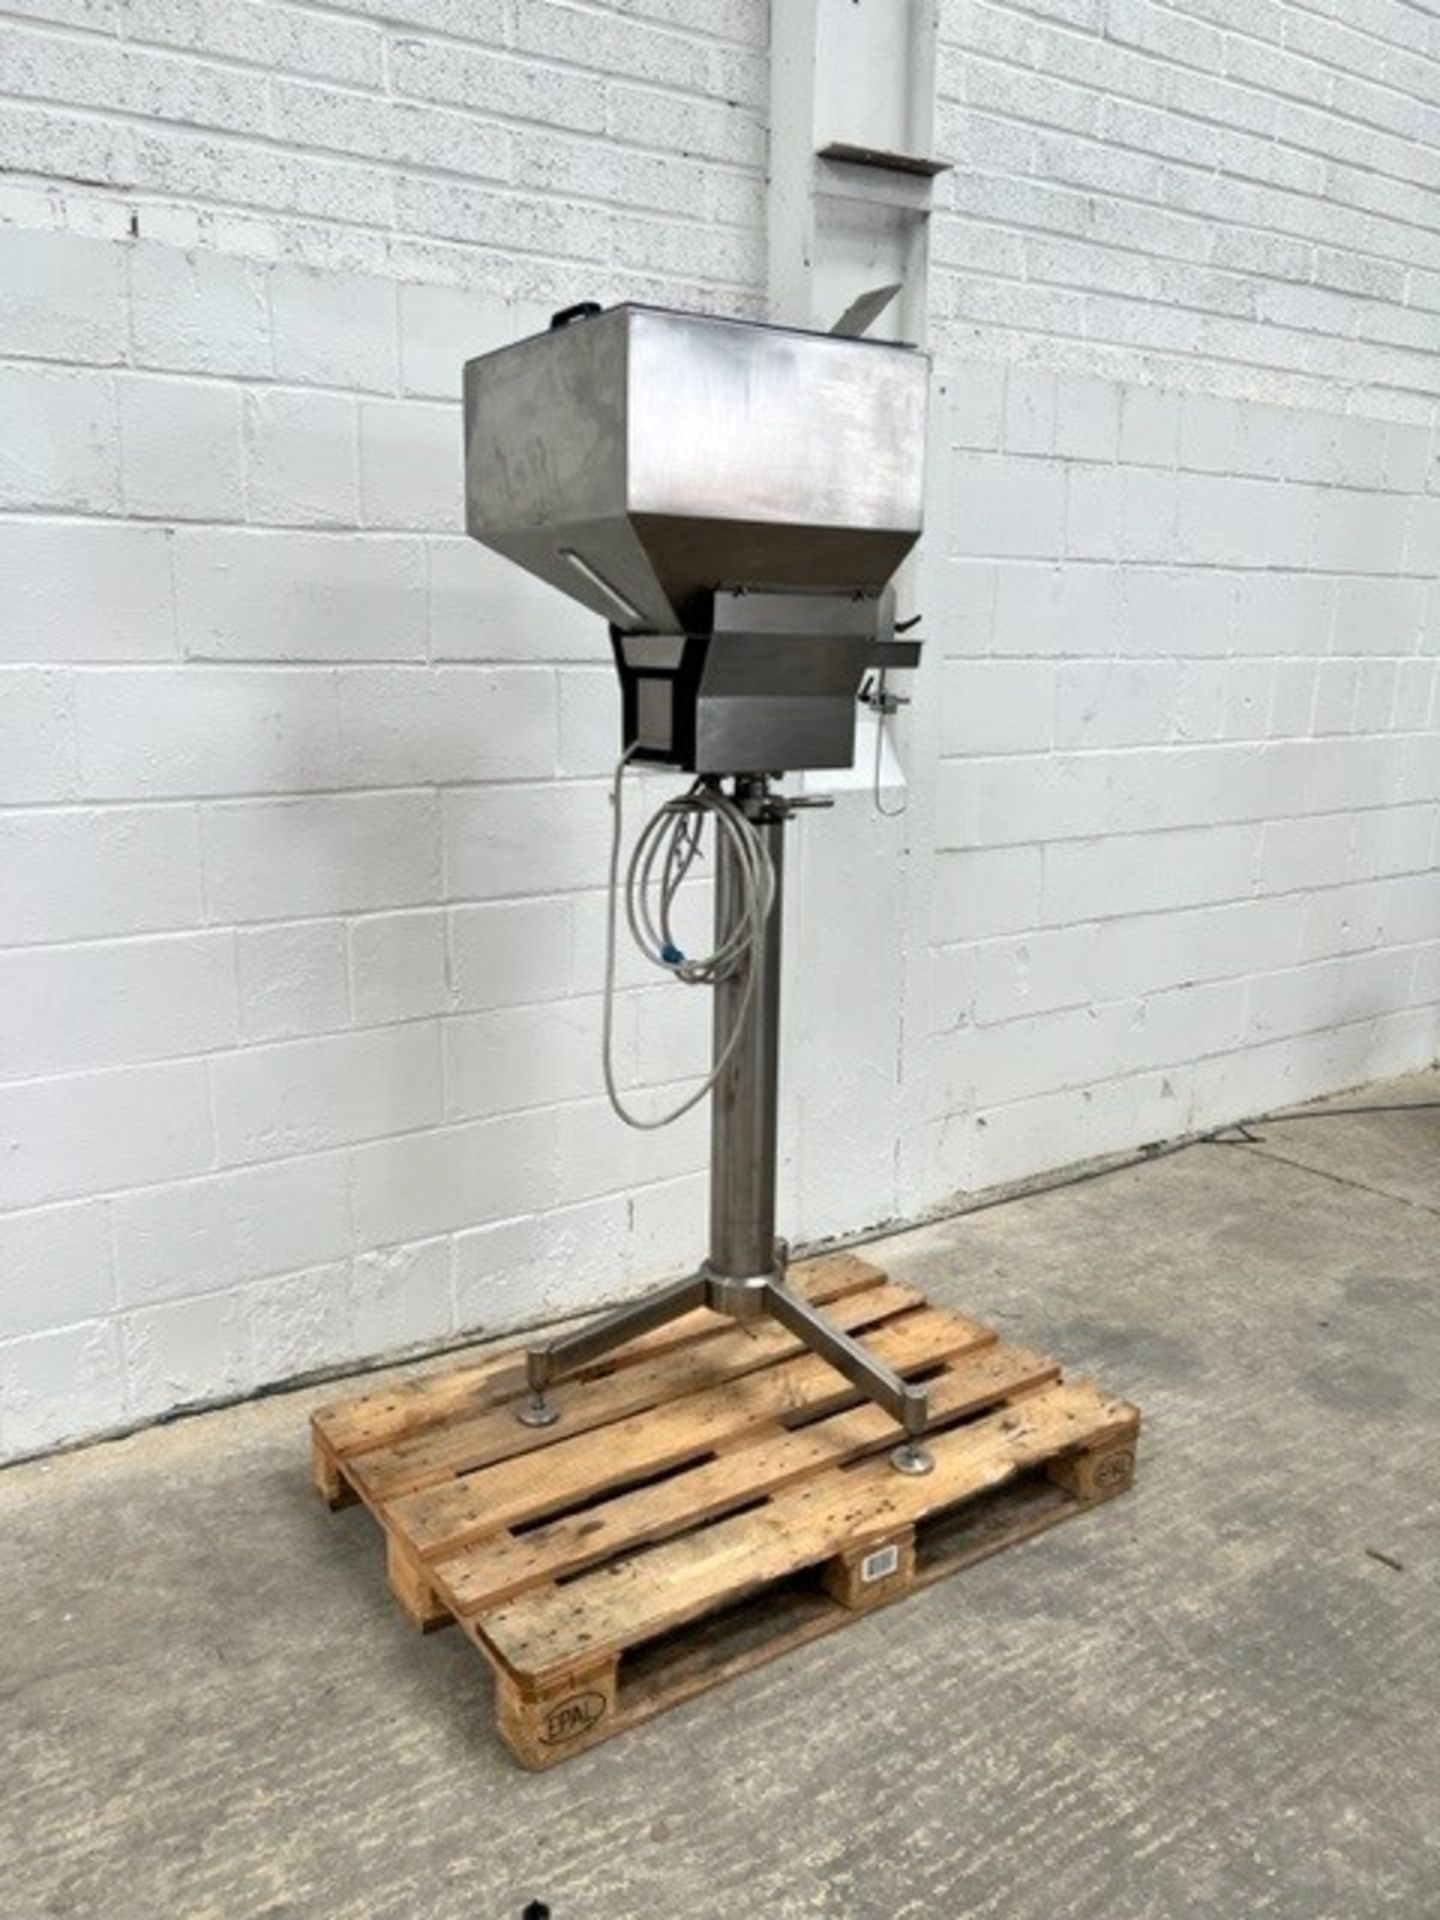 Stainless Steel Vibratory Feeder with Stand - Image 2 of 4